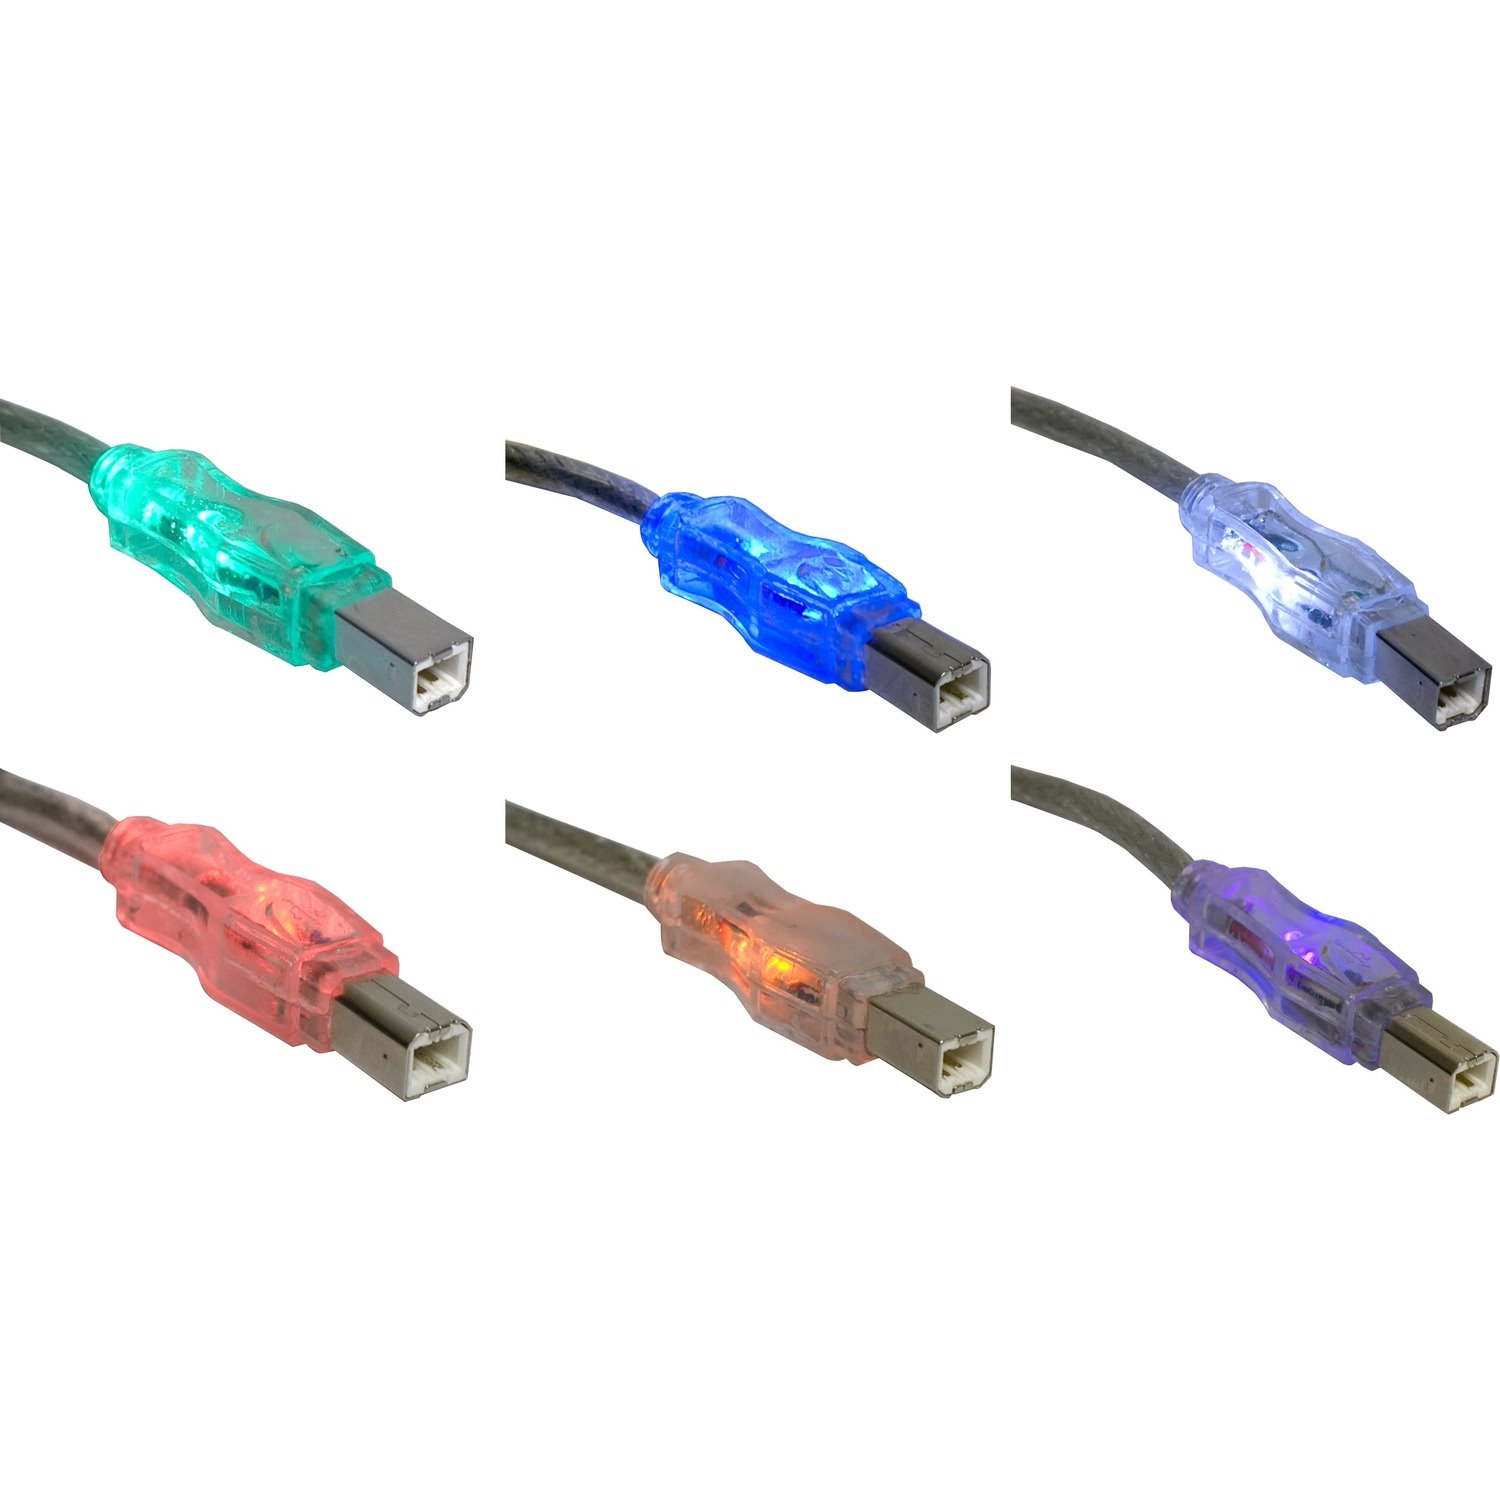 QVS USB 2.0 480Mbps Type A Male to B Male Translucent Cable with Multi-color LEDs